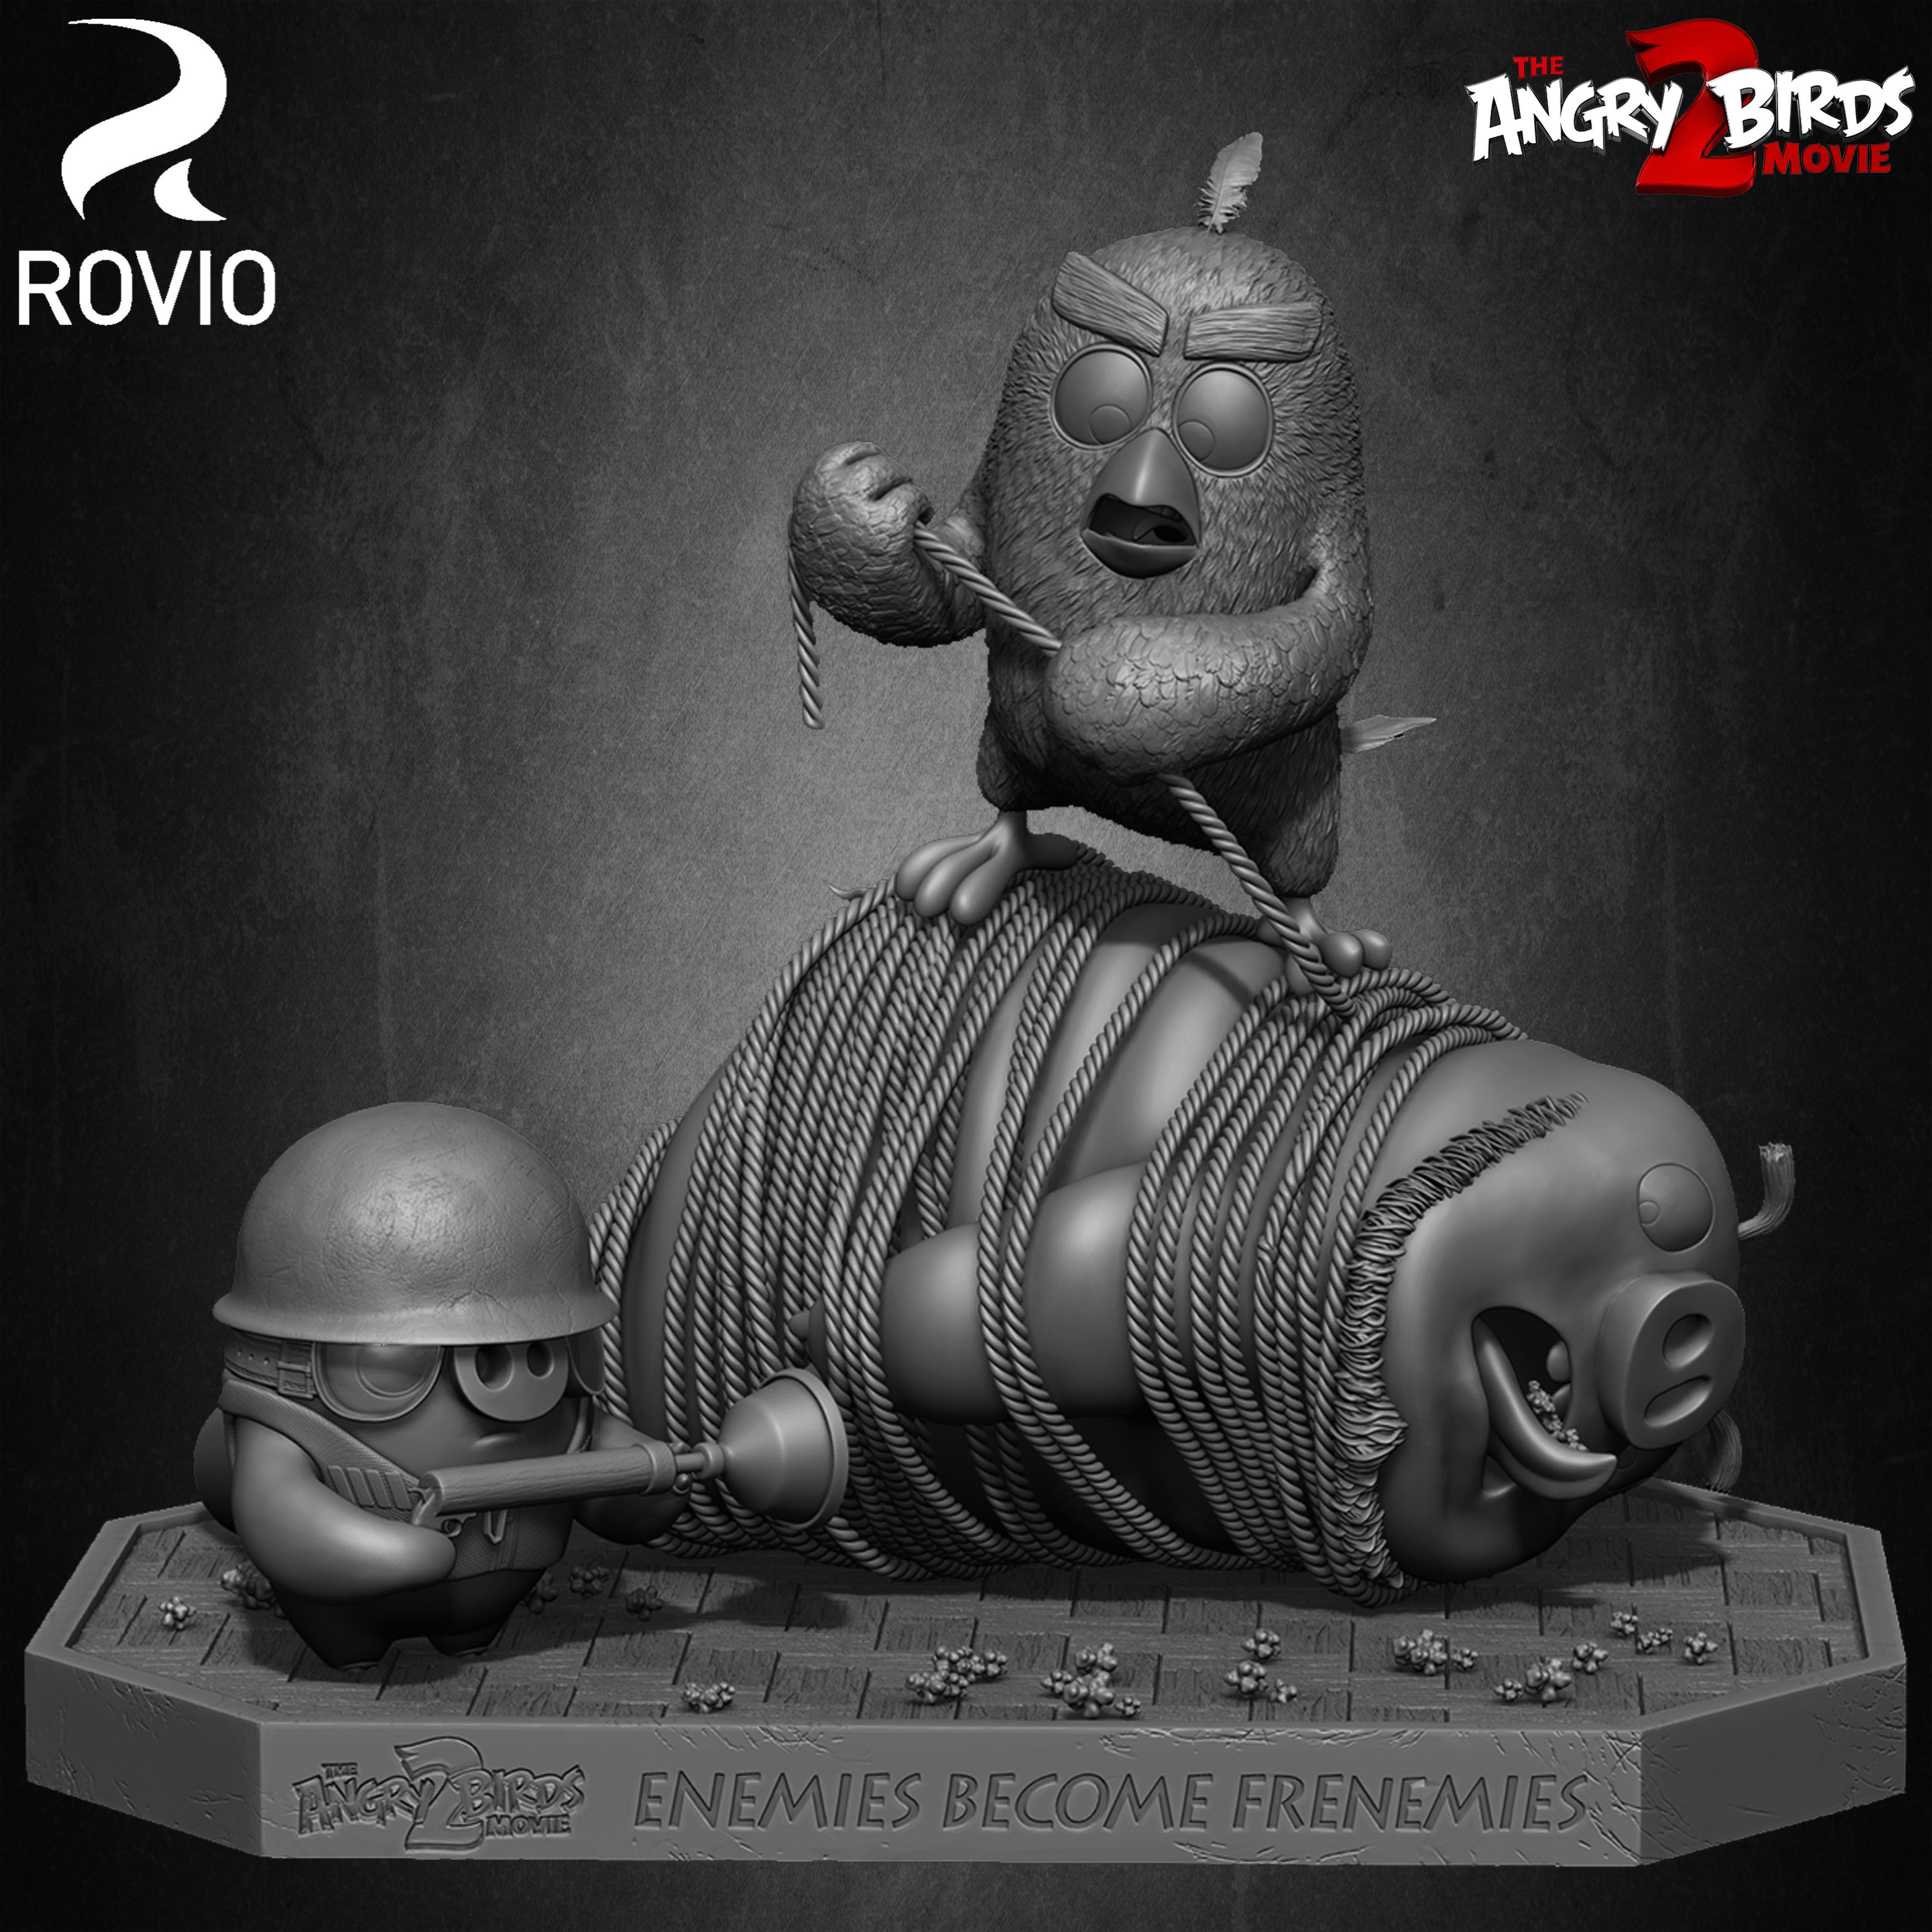 Red Leonard and the Pig Angry Birds Movie 2 Rovio Entertainment sculpted by Yacine BRINIS 001